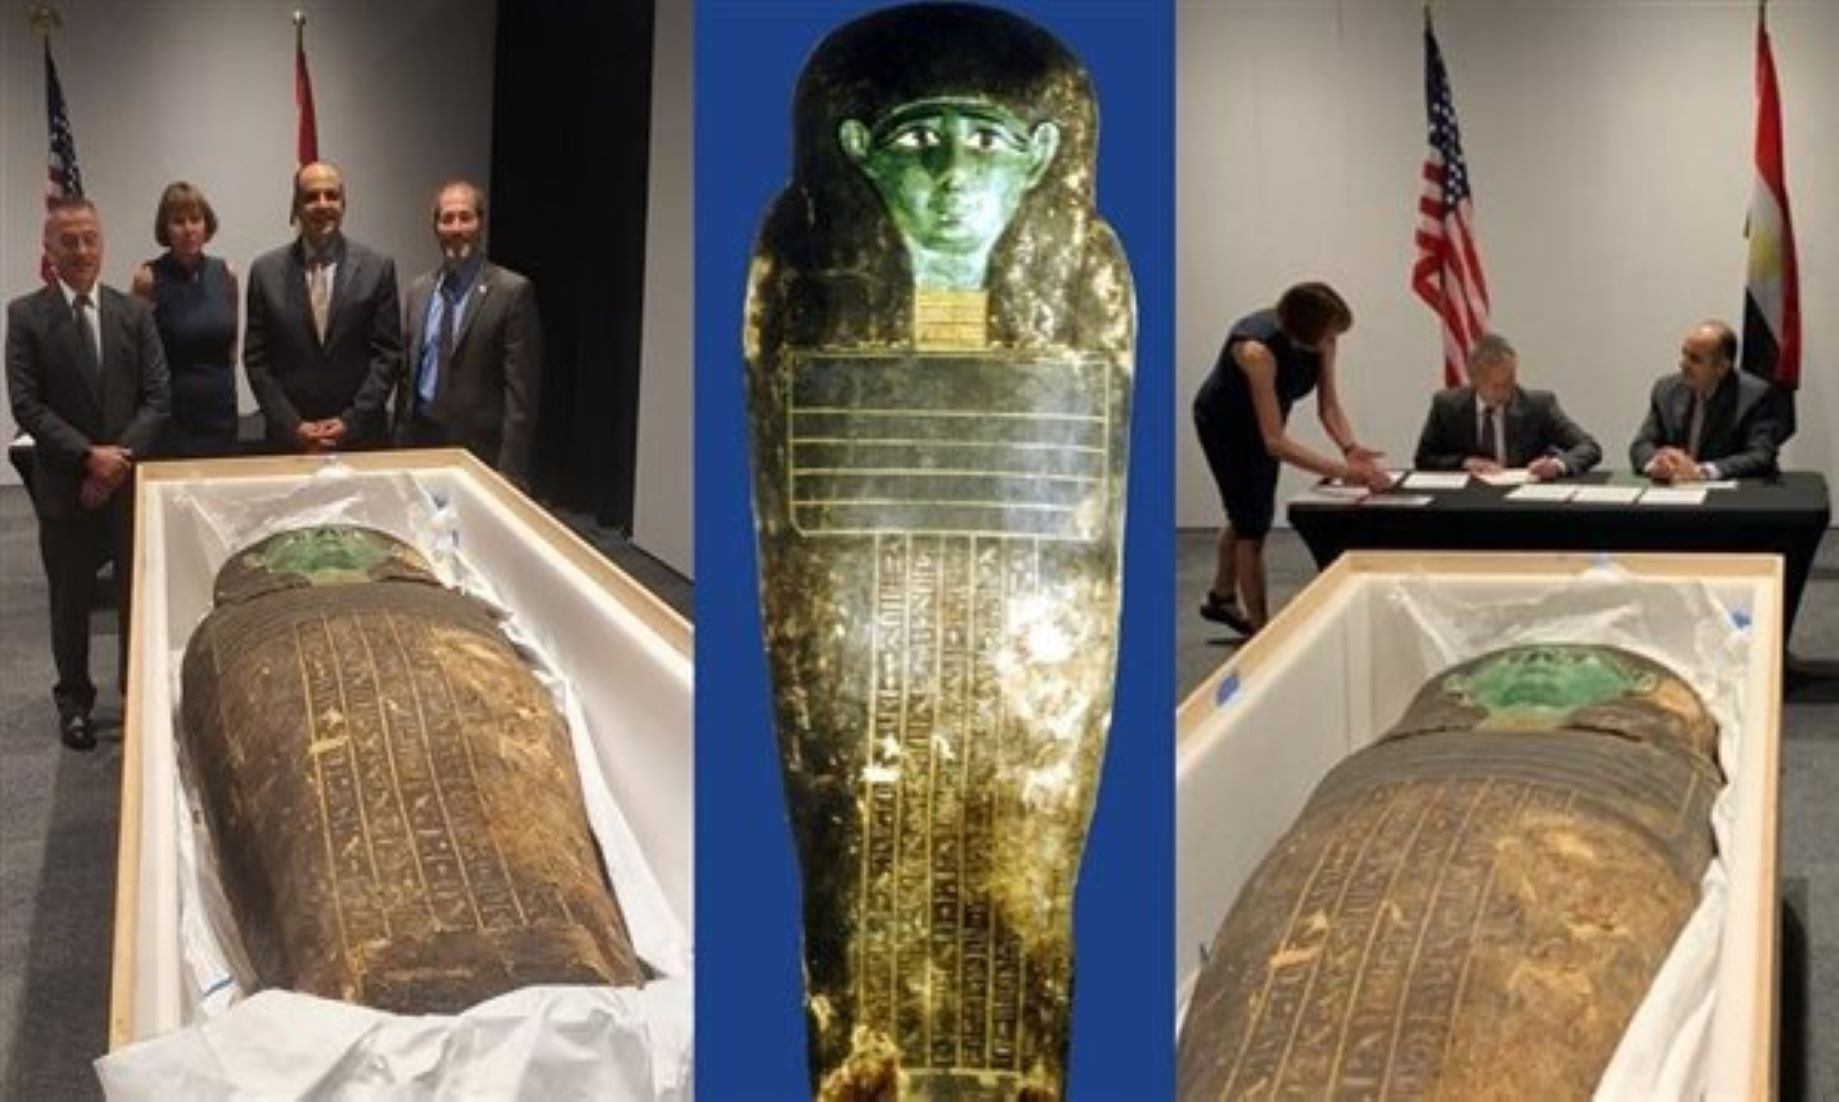 Egypt Retrieves Ancient “Green Coffin” From U.S.